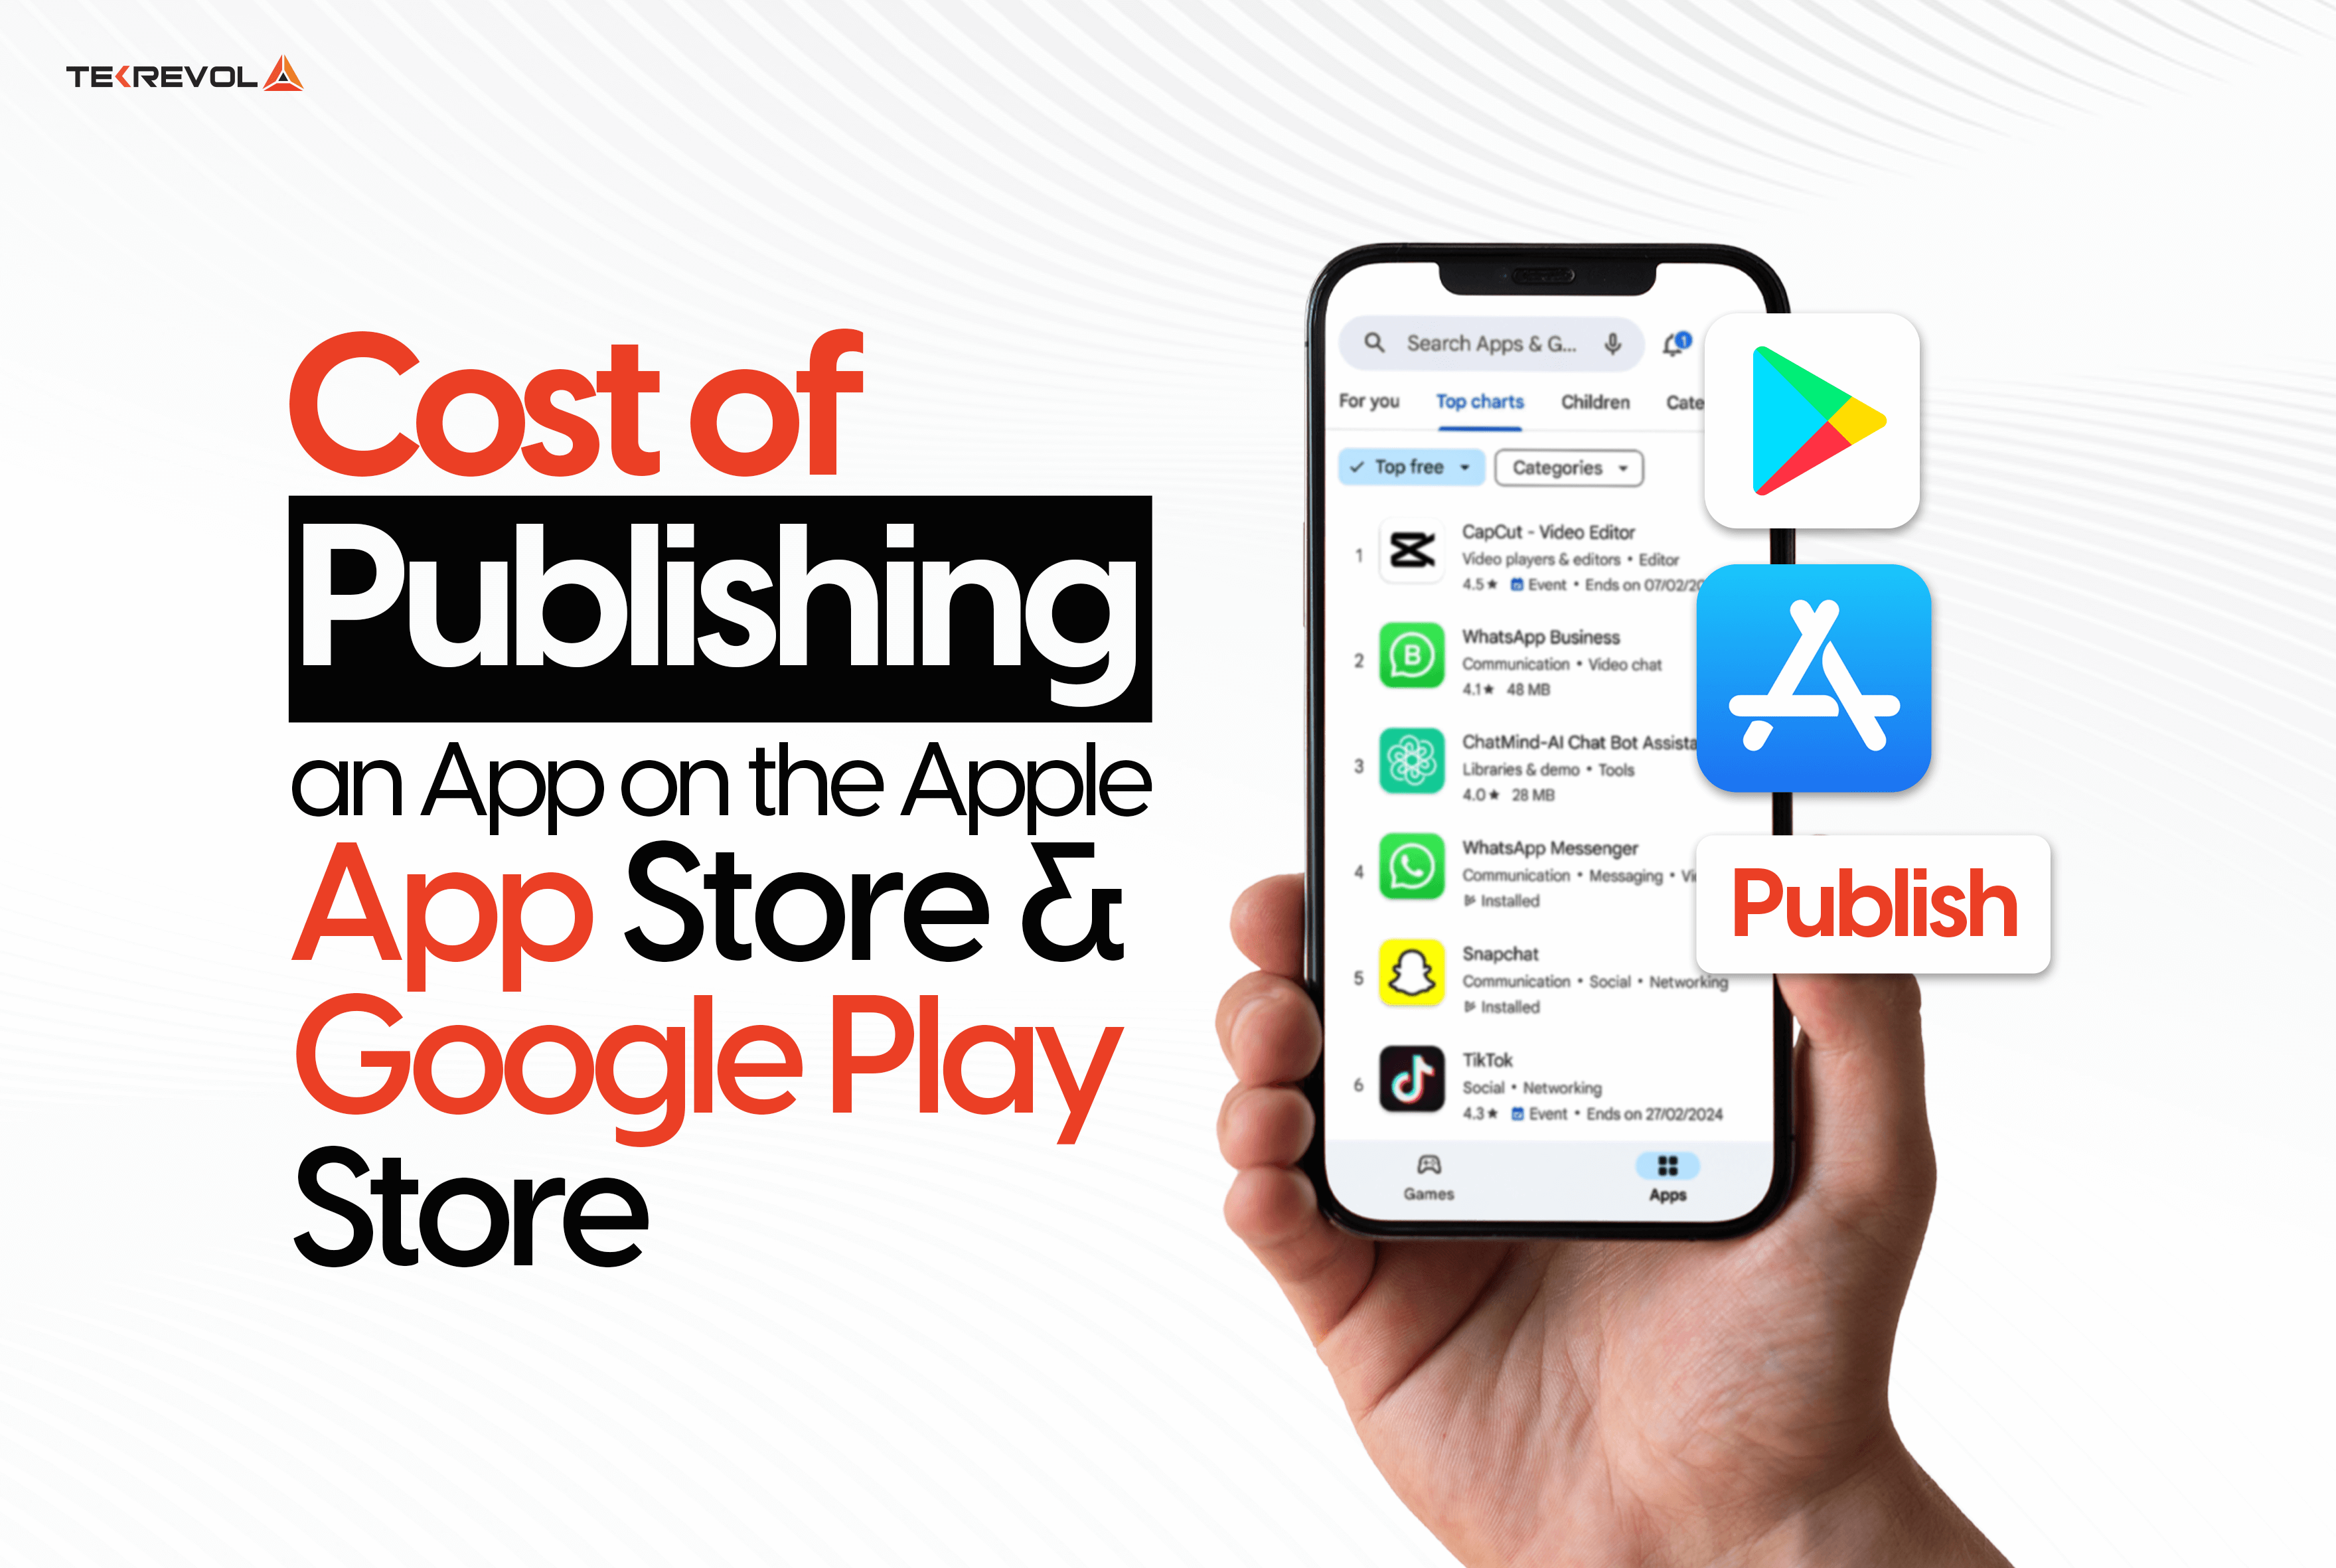 Cost-of-Publishing-an-App-on-the-Apple-App-Store-and-Google-Play-Store